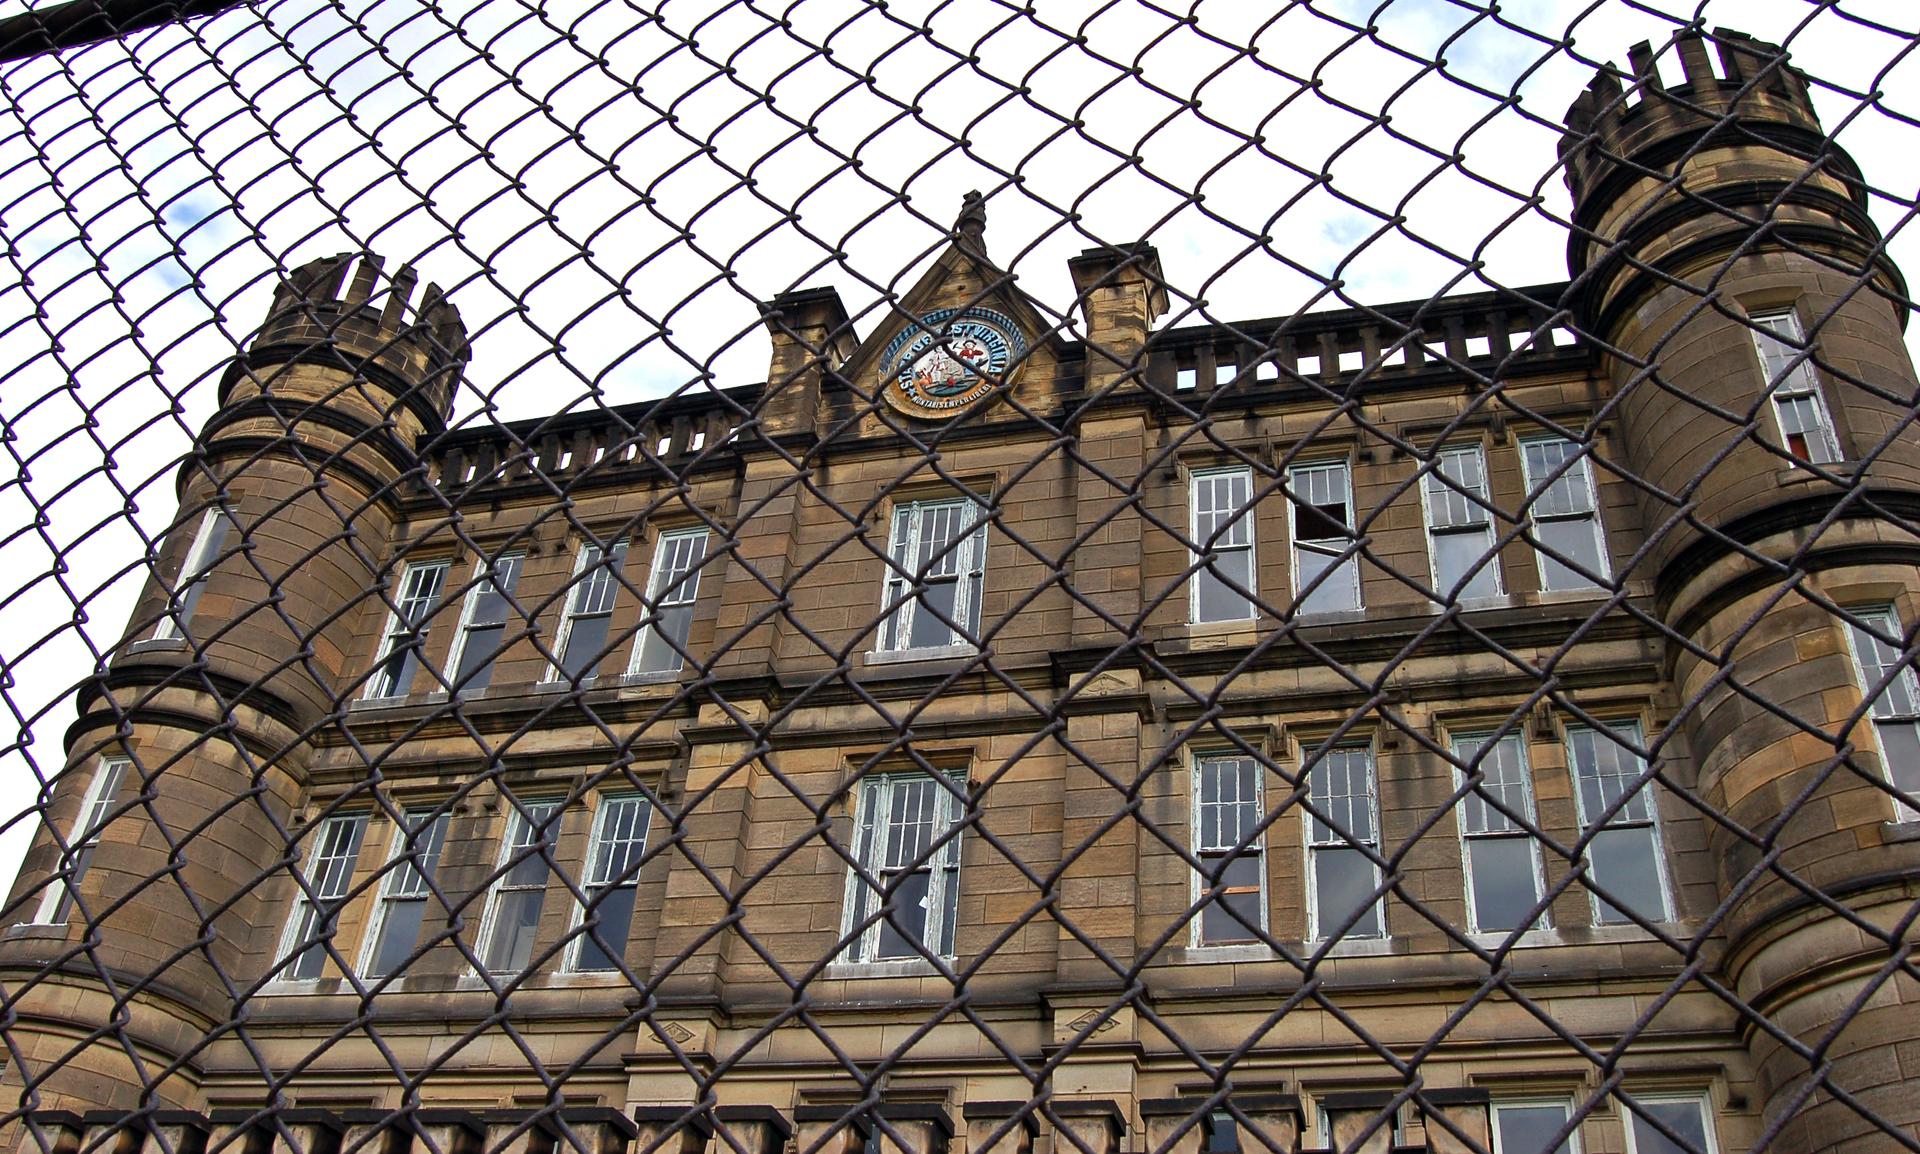 The exterior of the West Virginia Penitentiary in Moundsville, West Virginia.